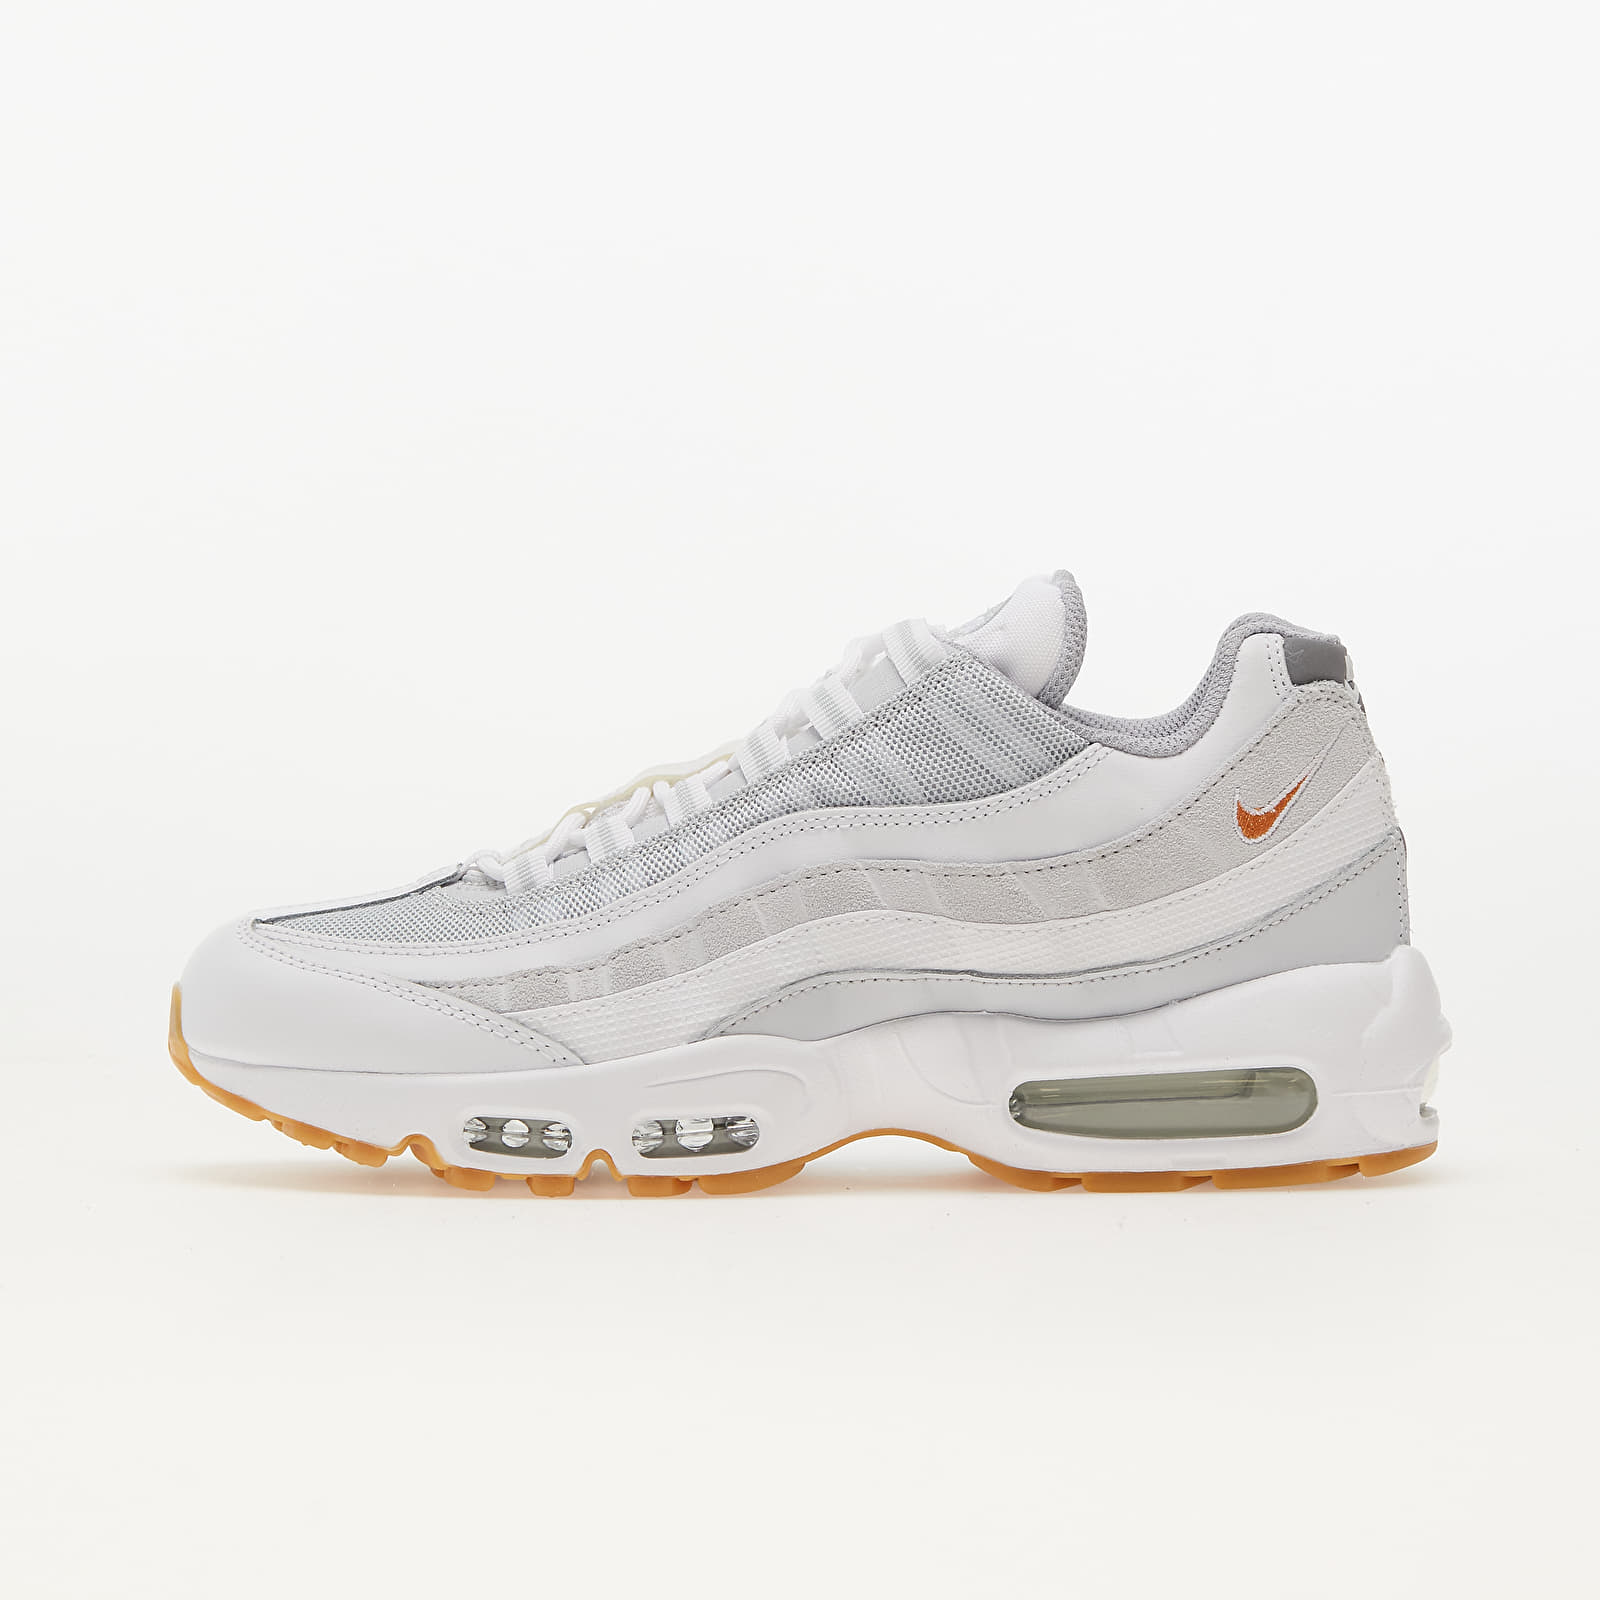 Zapatillas Hombre Nike Air Max 95 White/ Hot Curry-Pure Platinum-Wolf Grey